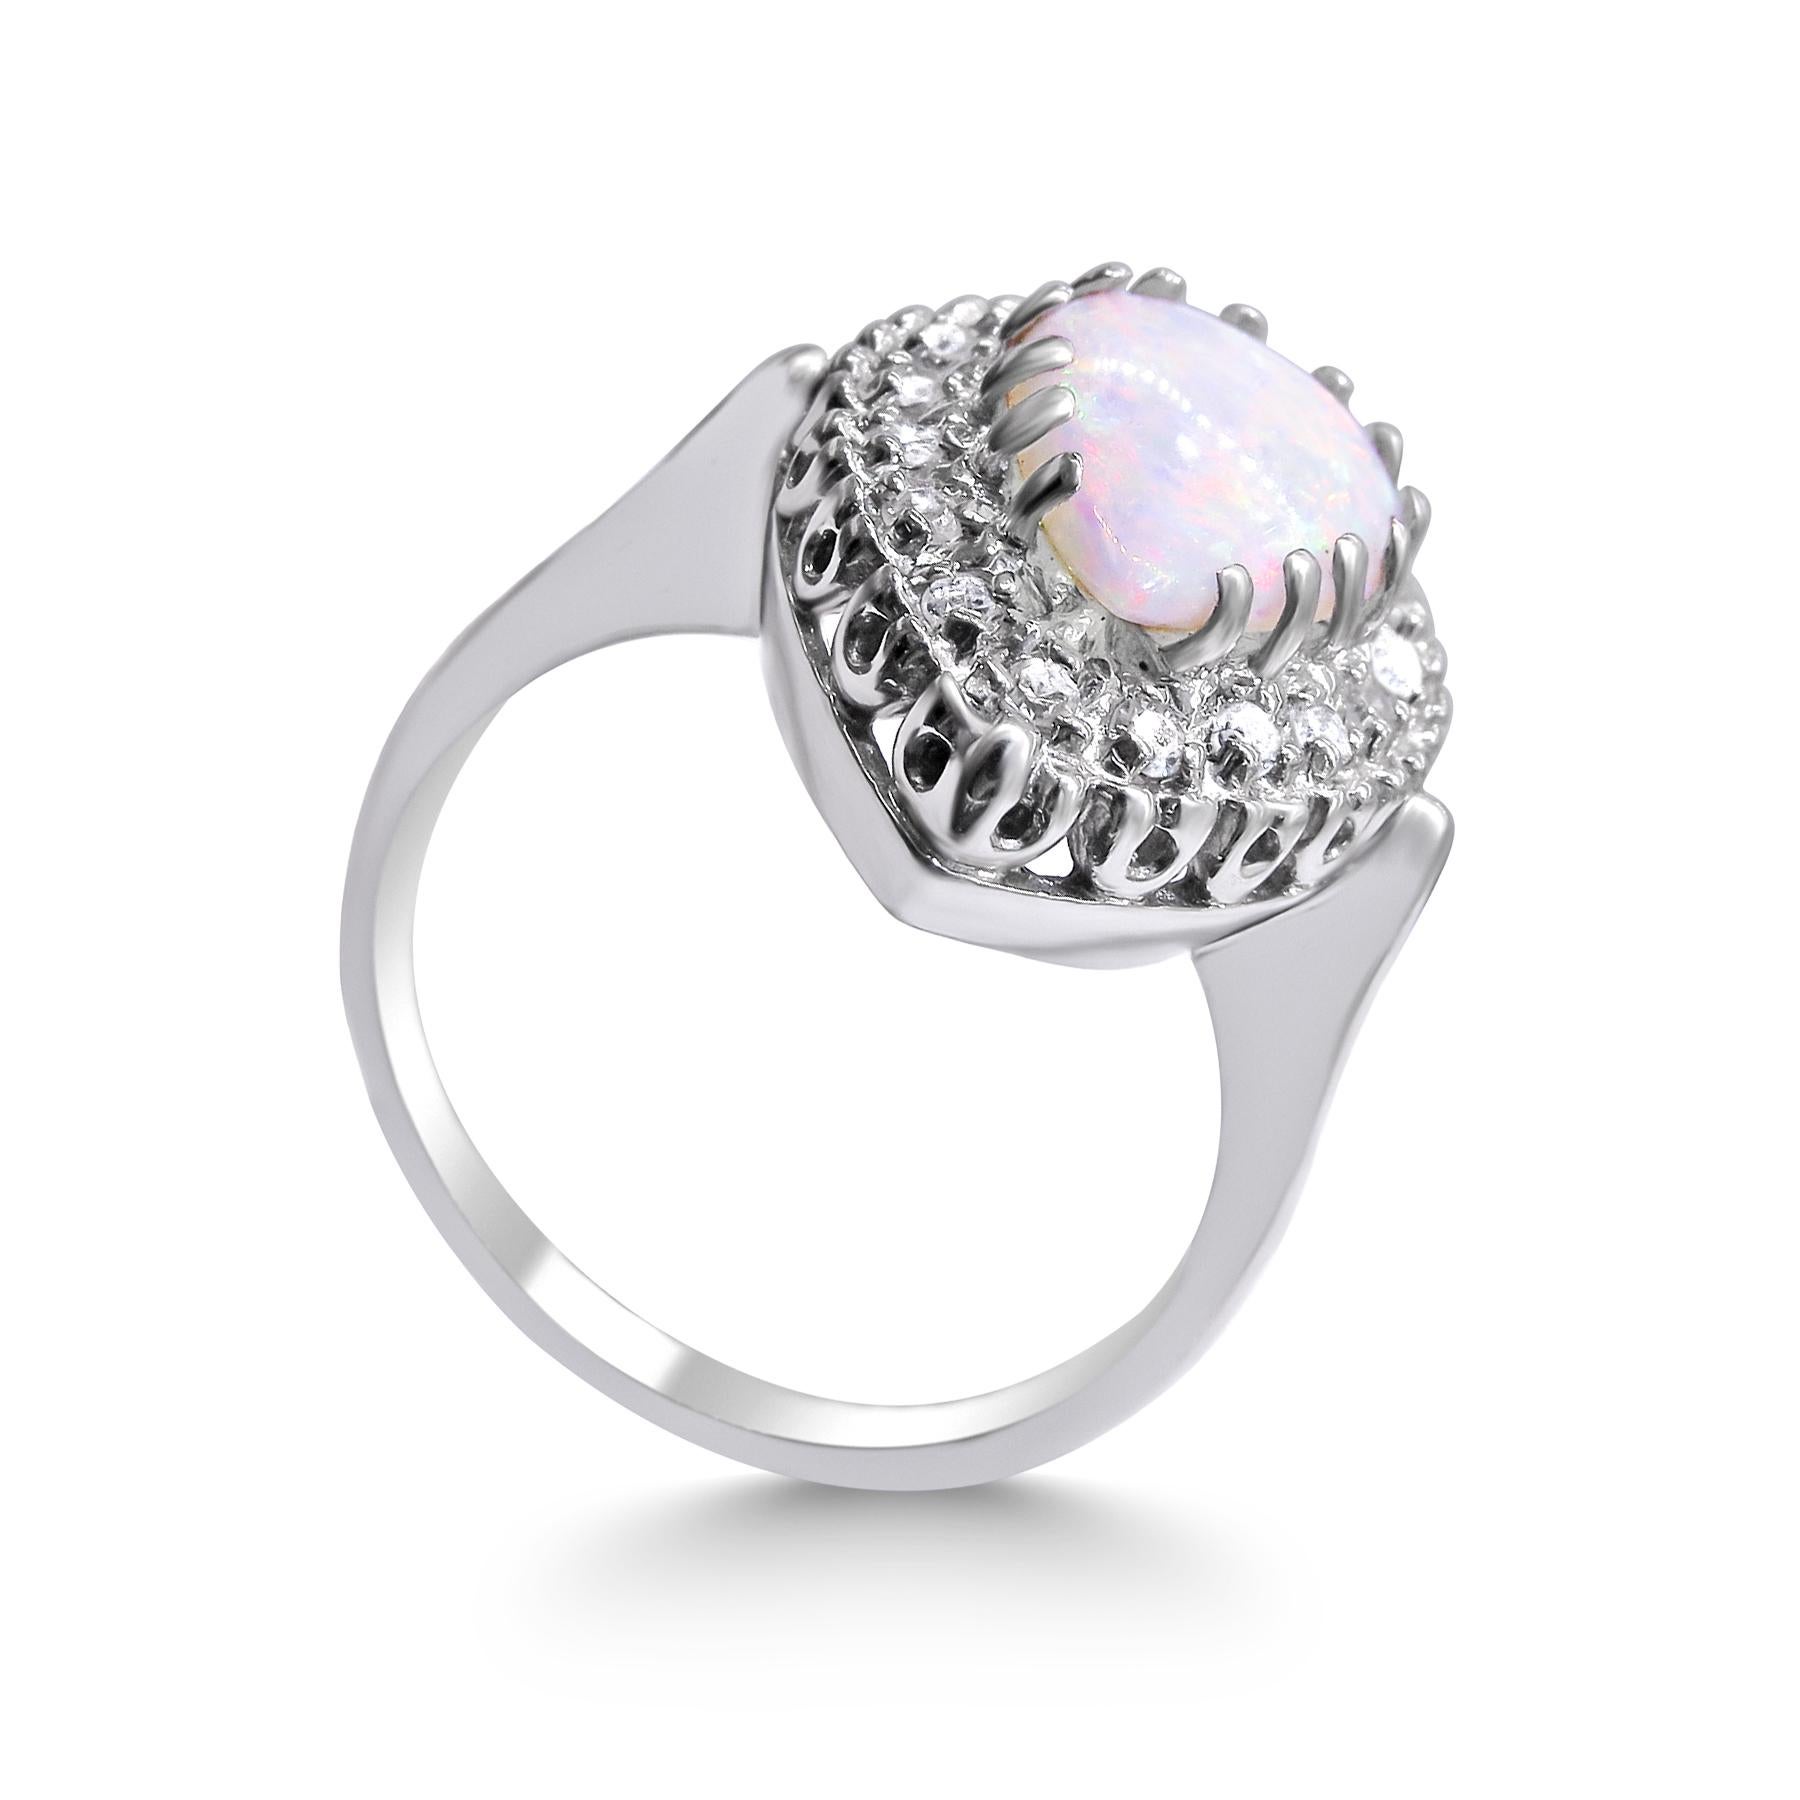 14k White gold
Weight= 5 gr 
Size= 7 (We offer complementary resizing upon request ) 
Diamond= 0.15 ct total 
Opal= 11mm x 8mm 